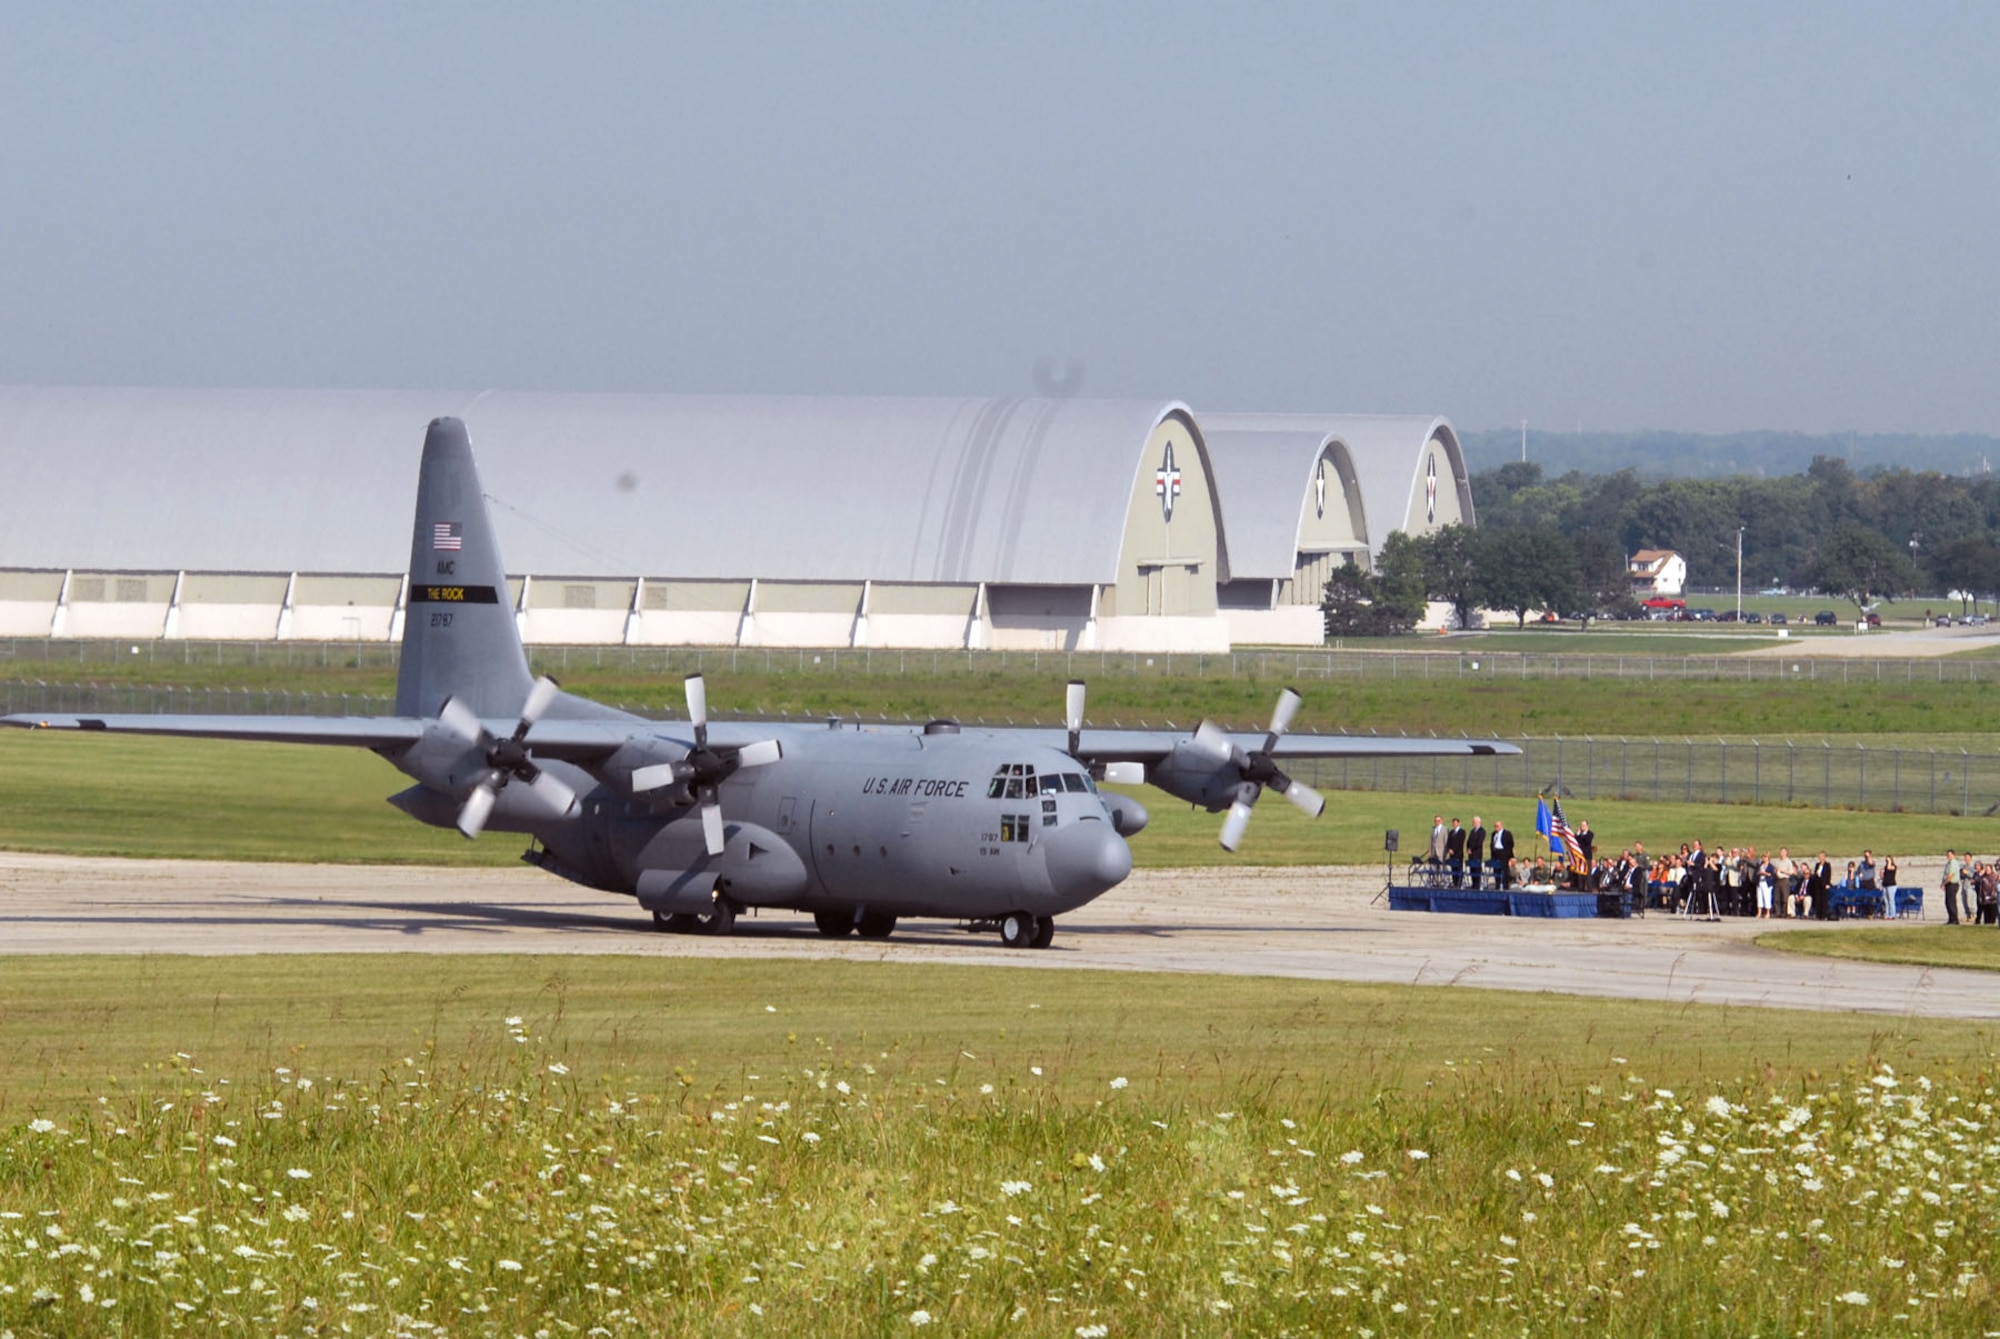 DAYTON, Ohio -- The C-130E SPARE 617 arrives at the National Museum of the U.S. Air Force after its final flight on Aug. 18, 2011. Not only is this C-130E (S/N 62-1787) representative of all C-130 transport aircraft, it also performed courageous work during the Southeast Asia War. Two members of its crew – Capt. William Caldwell, pilot, and Tech. Sgt. Charlie Shaub, loadmaster – were awarded Air Force Crosses, the U.S. Air Force’s second highest award for valor, for their heroic actions during the siege of An Loc in 1972. (U.S. Air Force photo by Jeff Fisher)